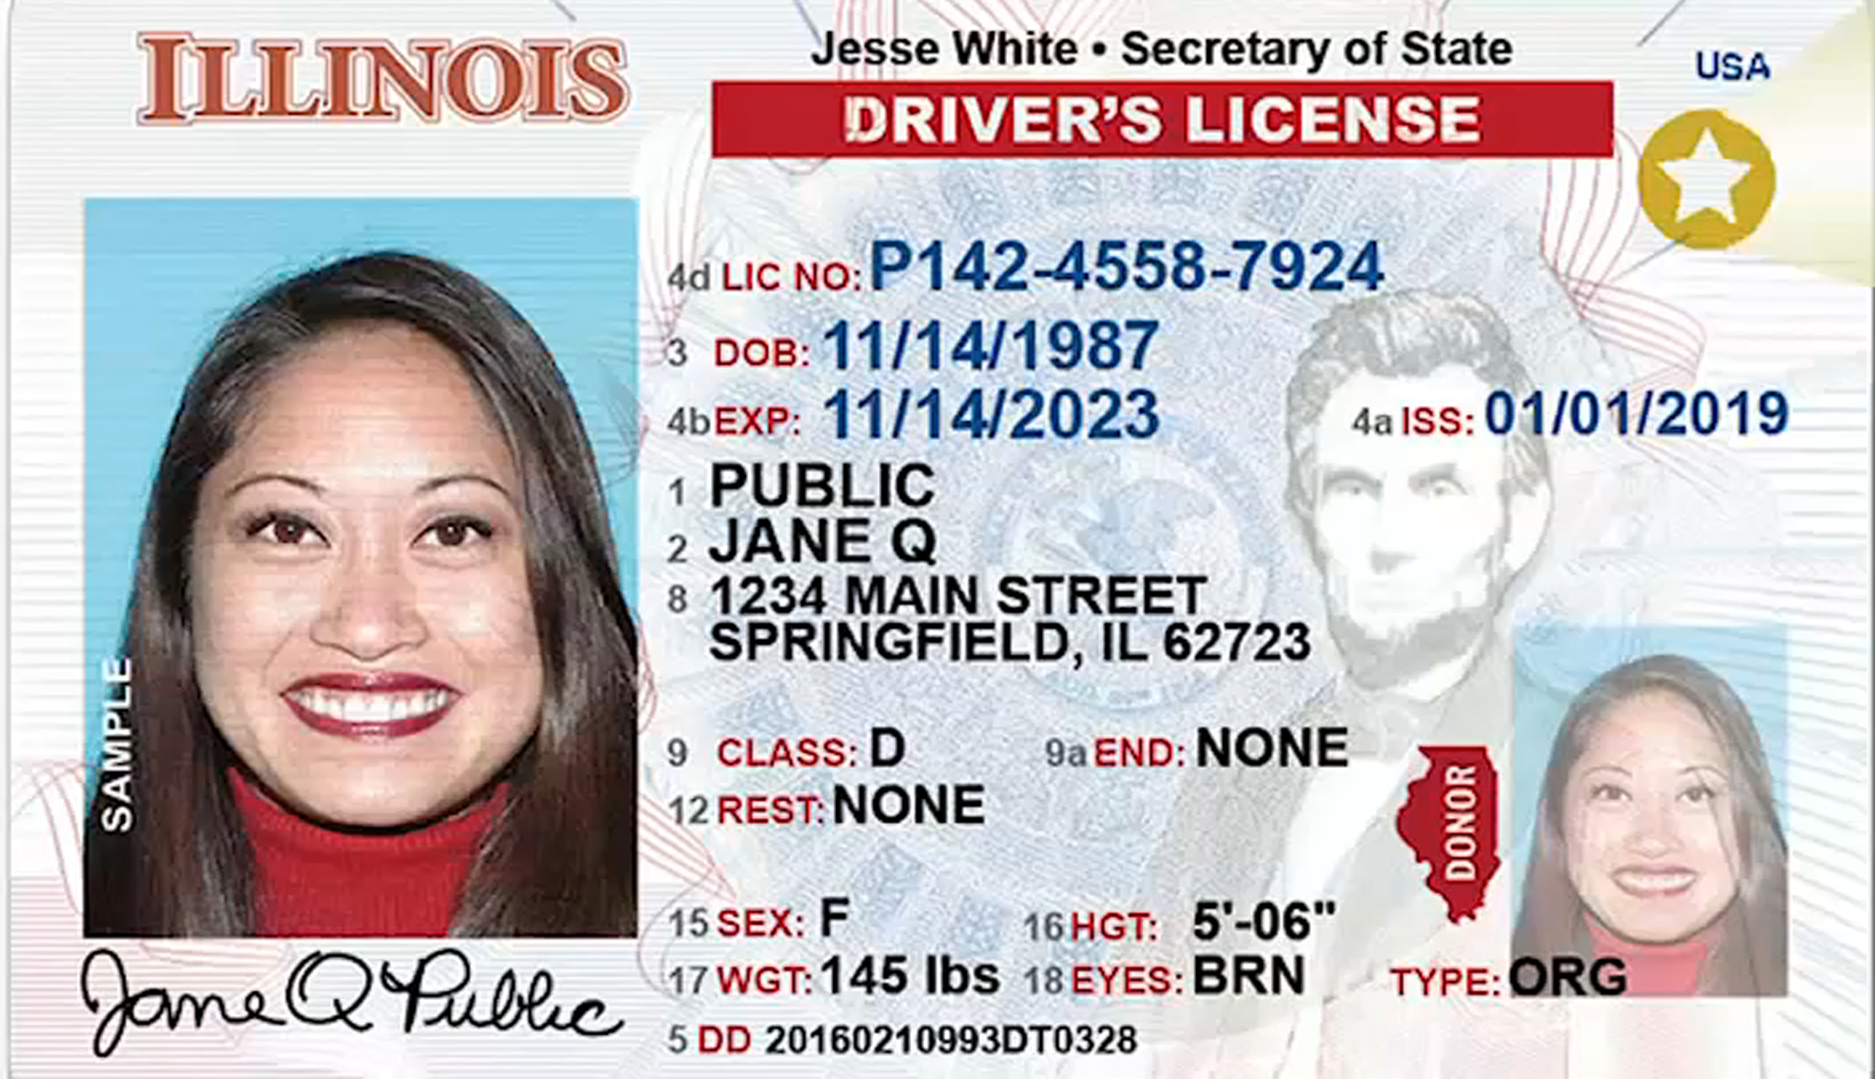 do you need a ssn to get a driver's license